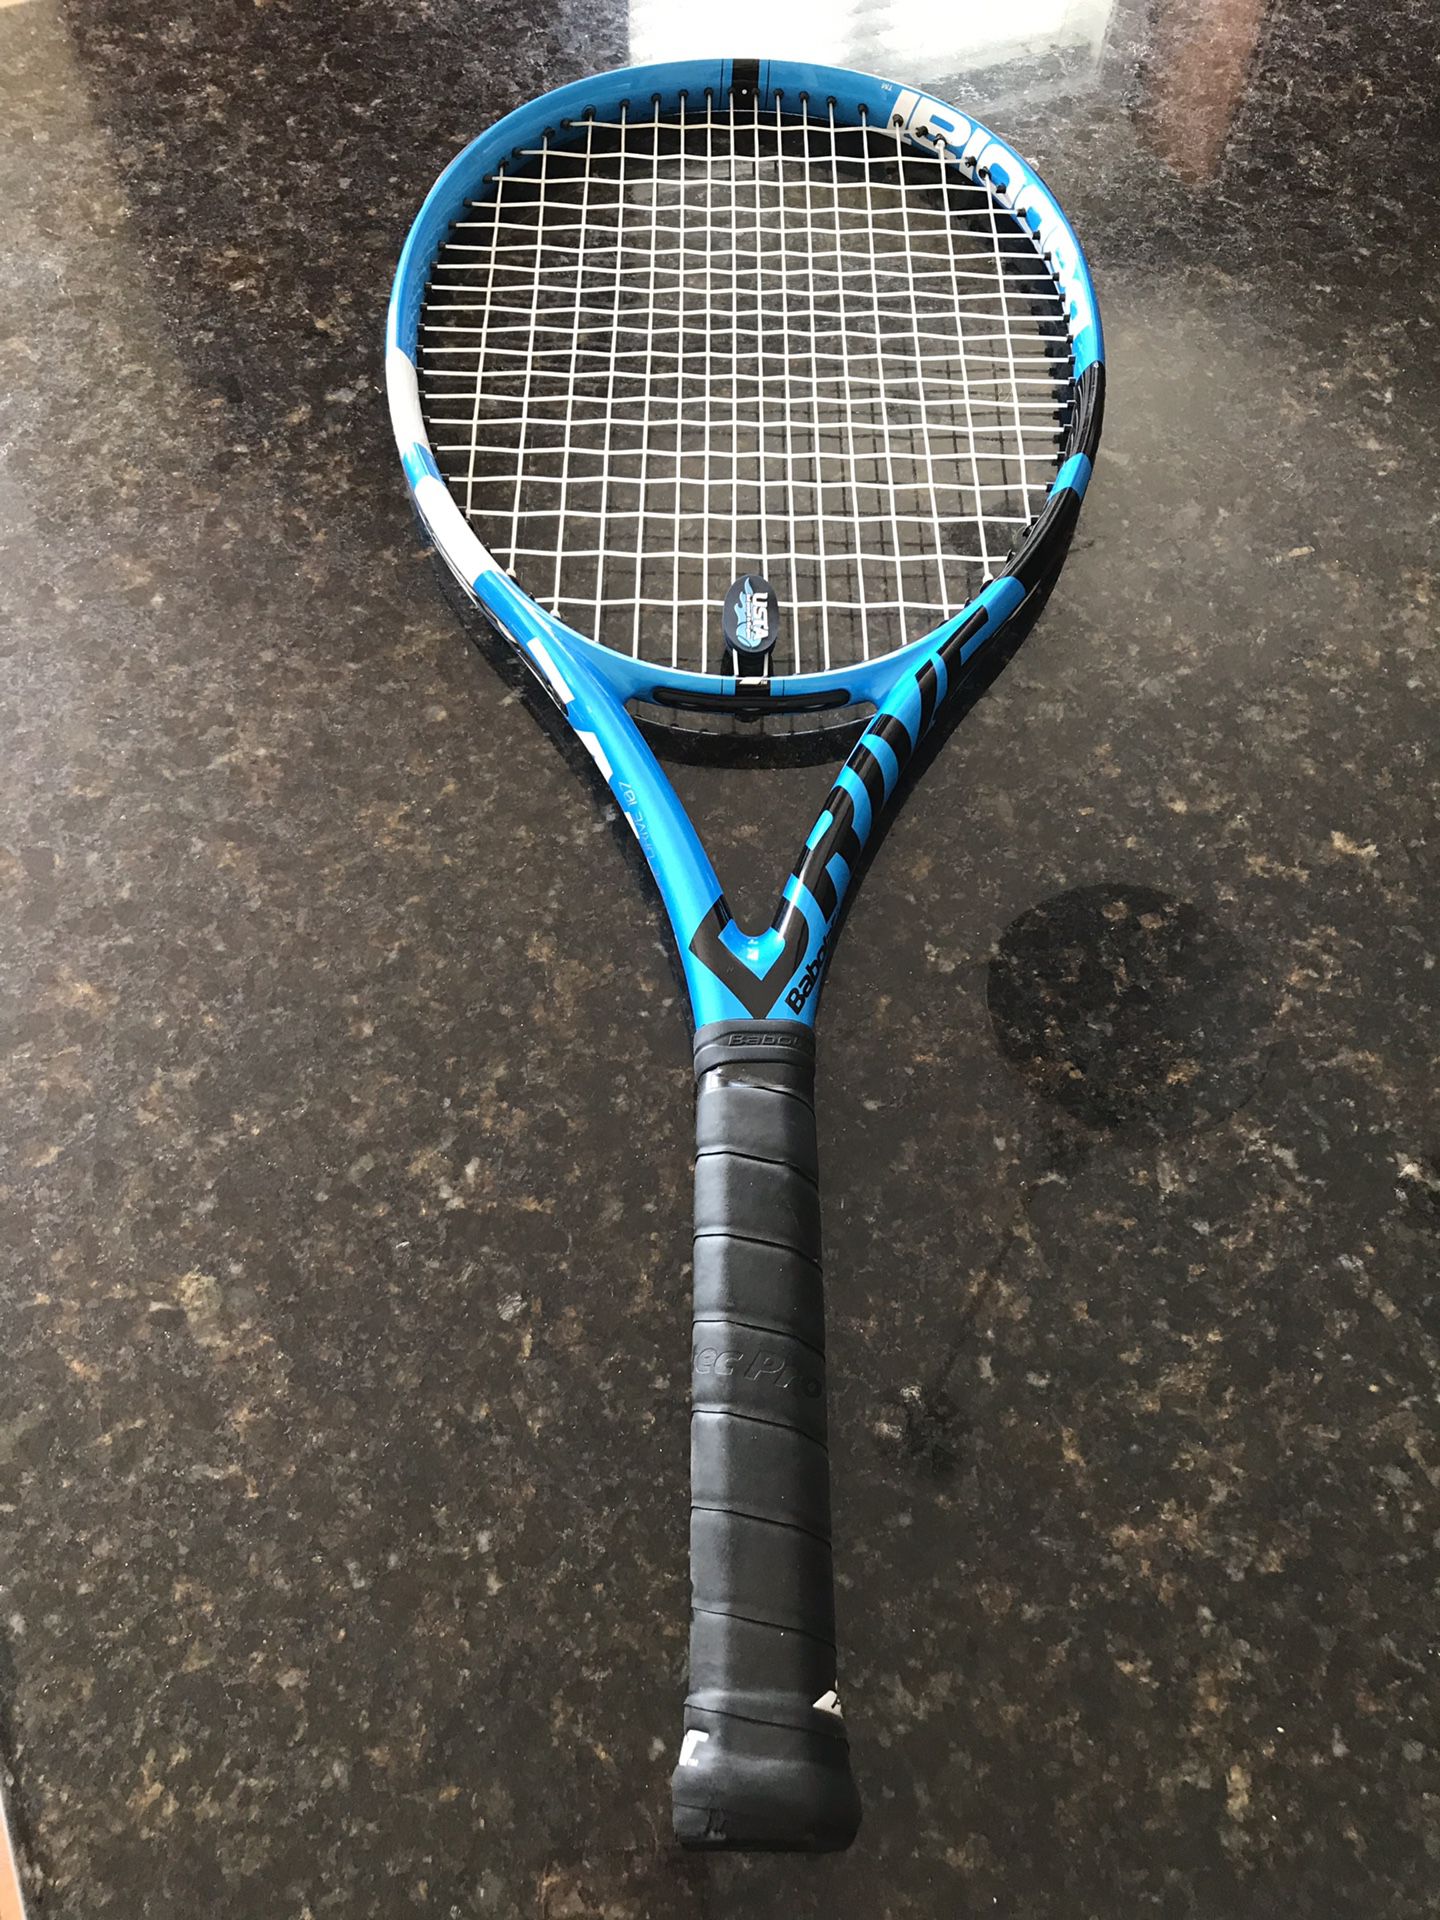 BABOLAT 🎾PURE DRIVE TENNIS RACKET. $130 plus $7 SHIPPING. GRIP SIZE 41/4